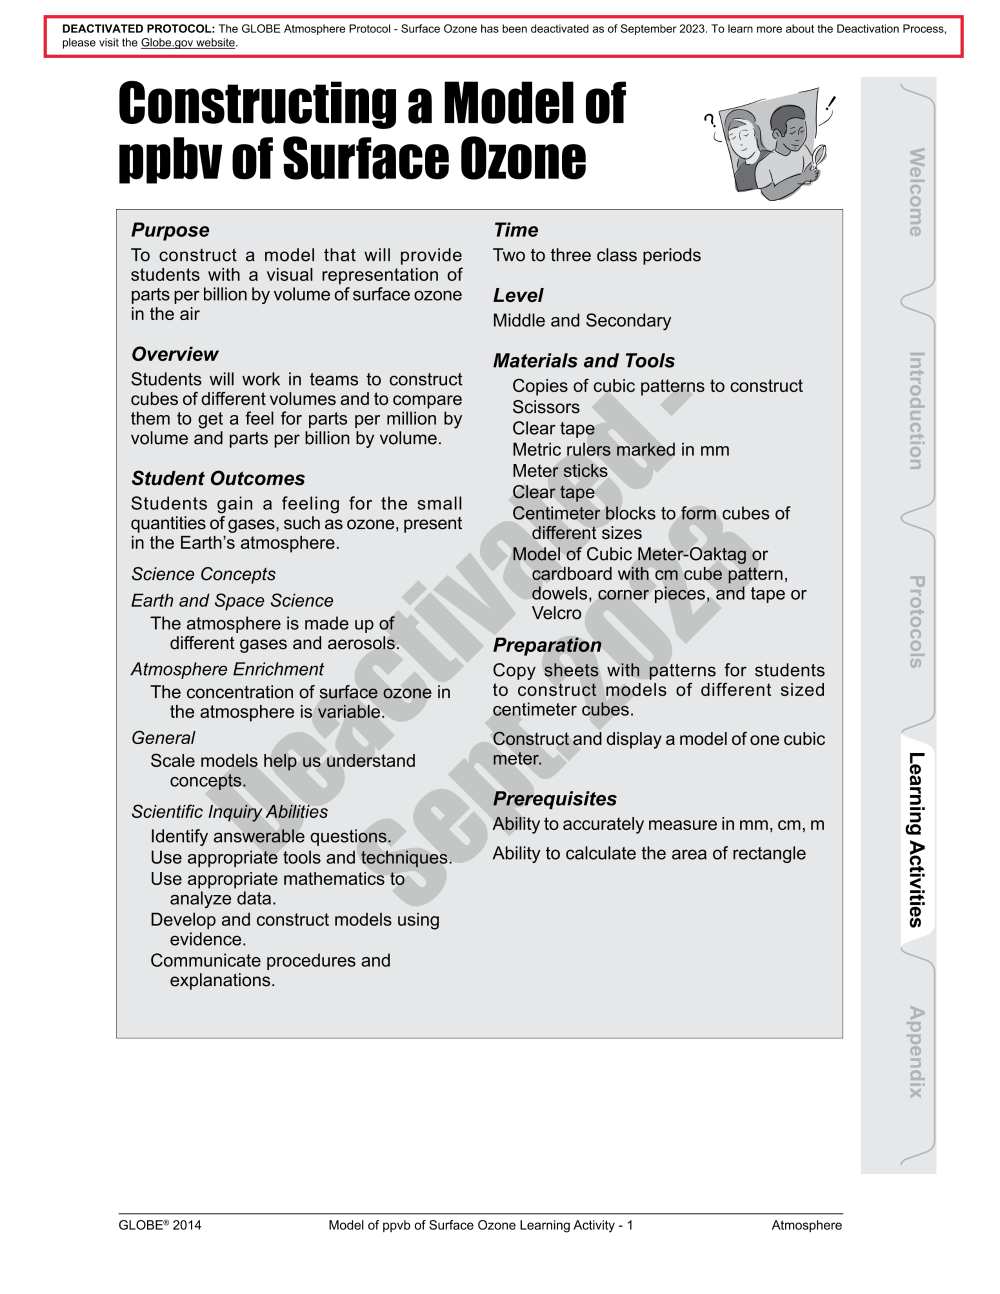 Learning Activities preview for Constructing a Model of ppbv of Surface Ozone